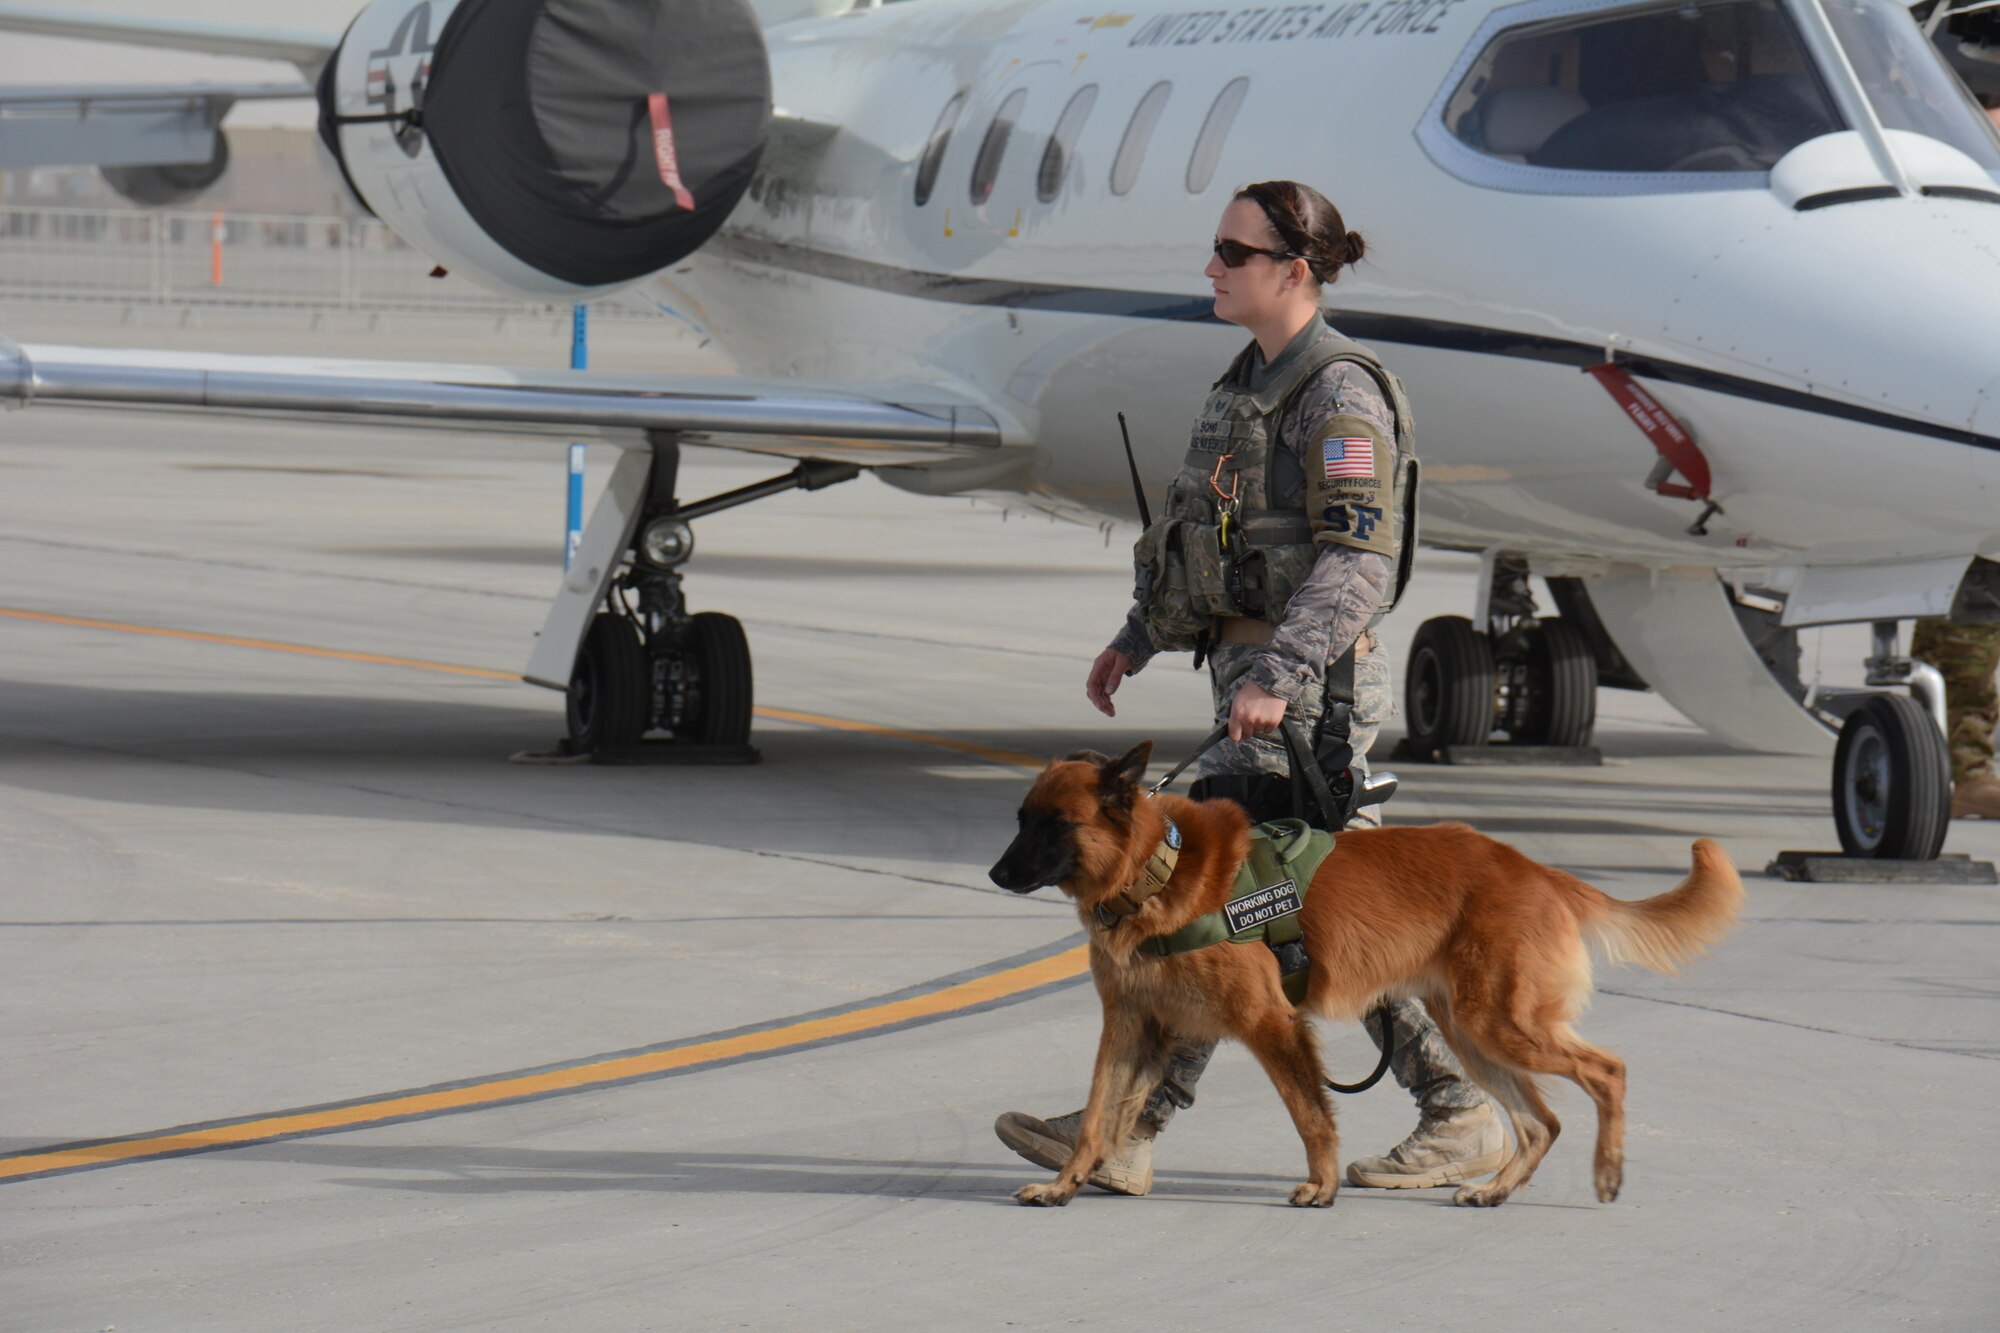 Staff Sgt. Taylor Song, 379th Expeditionary Security Forces Squadron military working dog handler, conducts a security check at the annual Flight Line Fest at Al Udeid Air Base, Qatar, Jan. 10. The event is held to foster relations between Qatar and the United States and featured nine aircraft and an emergency vehicle display. (U.S. Air Force photo by Tech. Sgt. James Hodgman/Released)